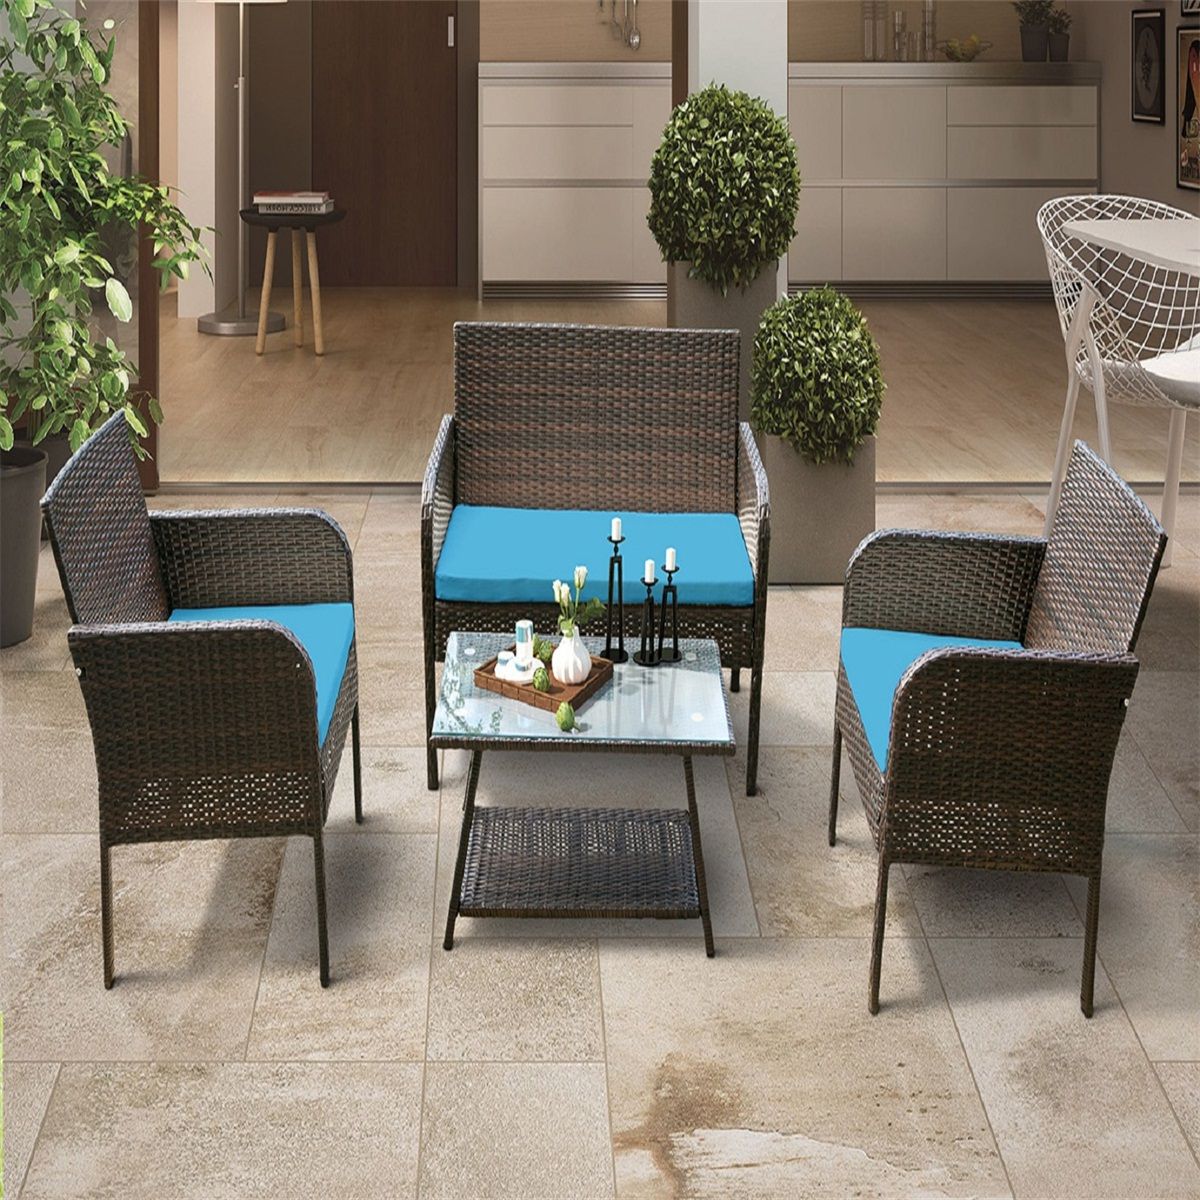 4 Piece Outdoor Seating Patio Sets With Regard To Well Liked 4 Piece Rattan Sofa Sets Seating Group With Cushions, Outdoor Ratten (View 6 of 15)